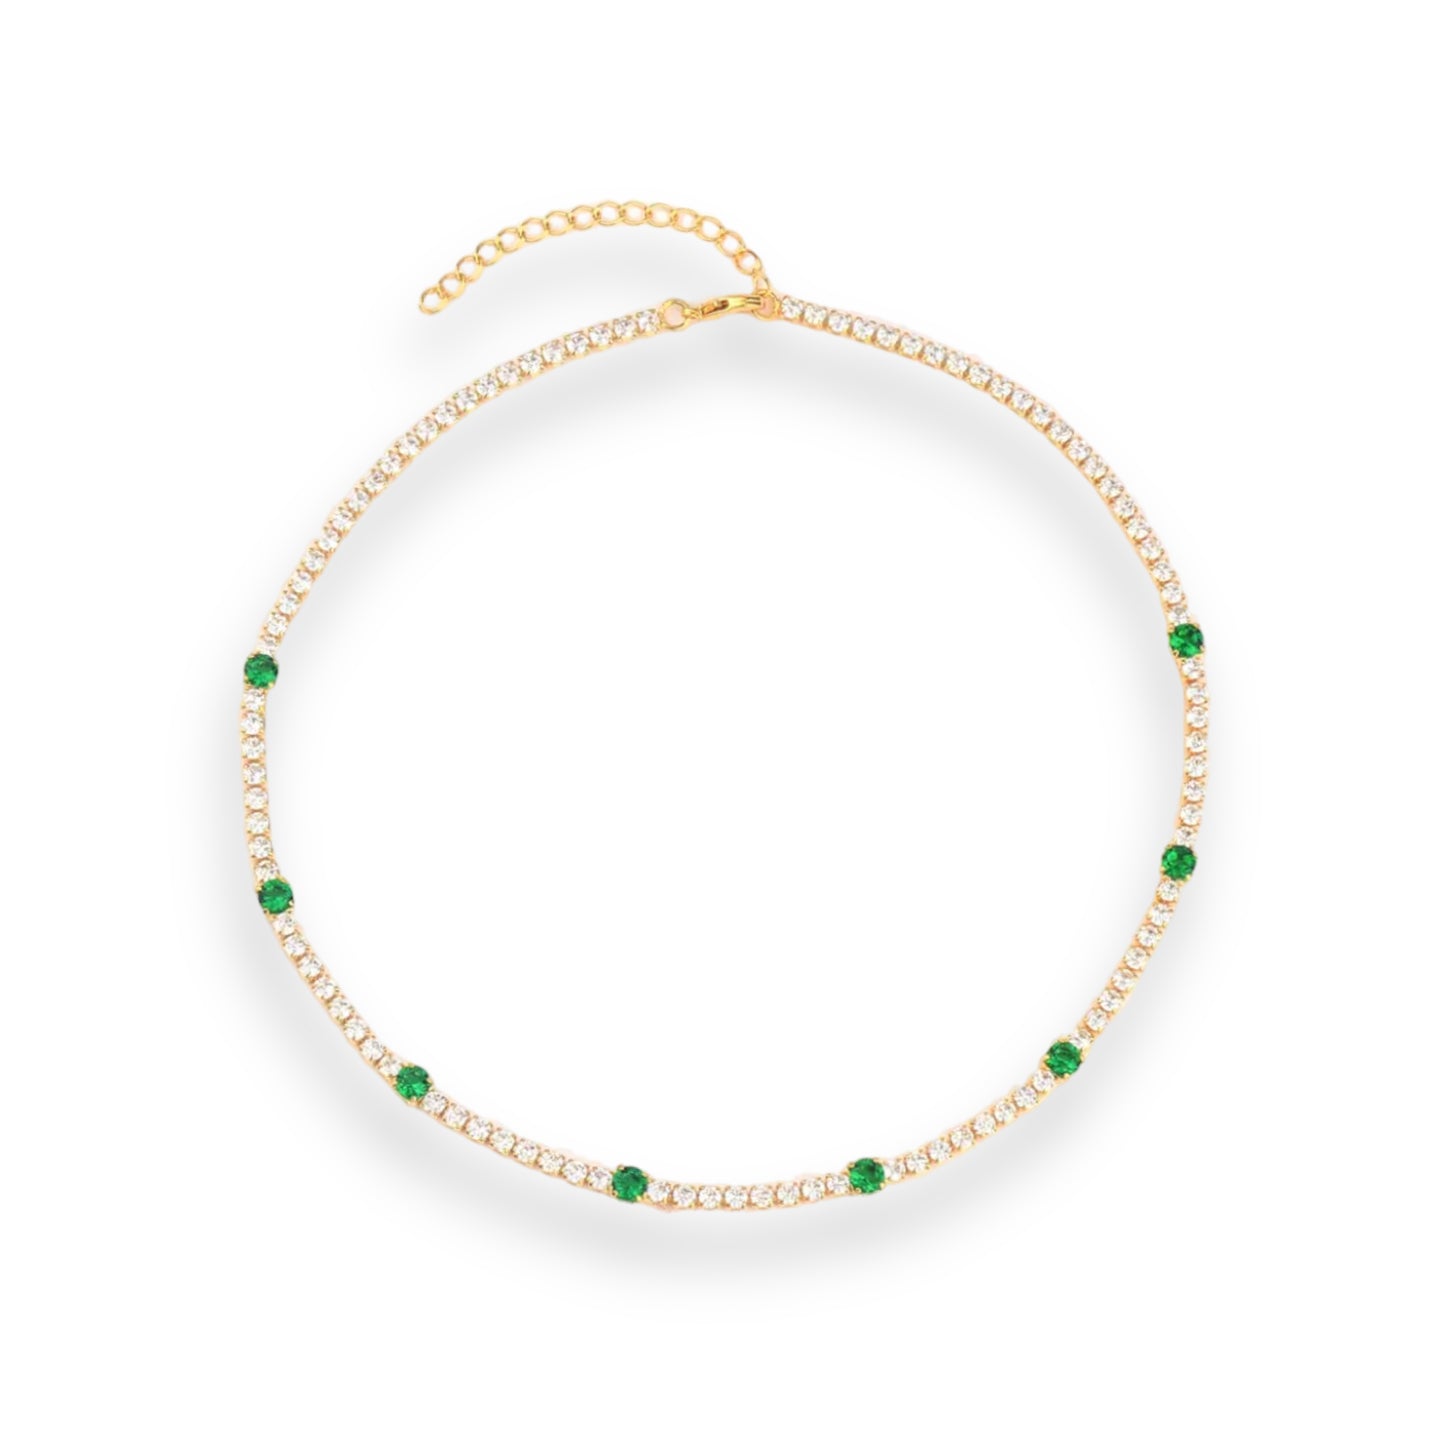 Green and white tennis necklace